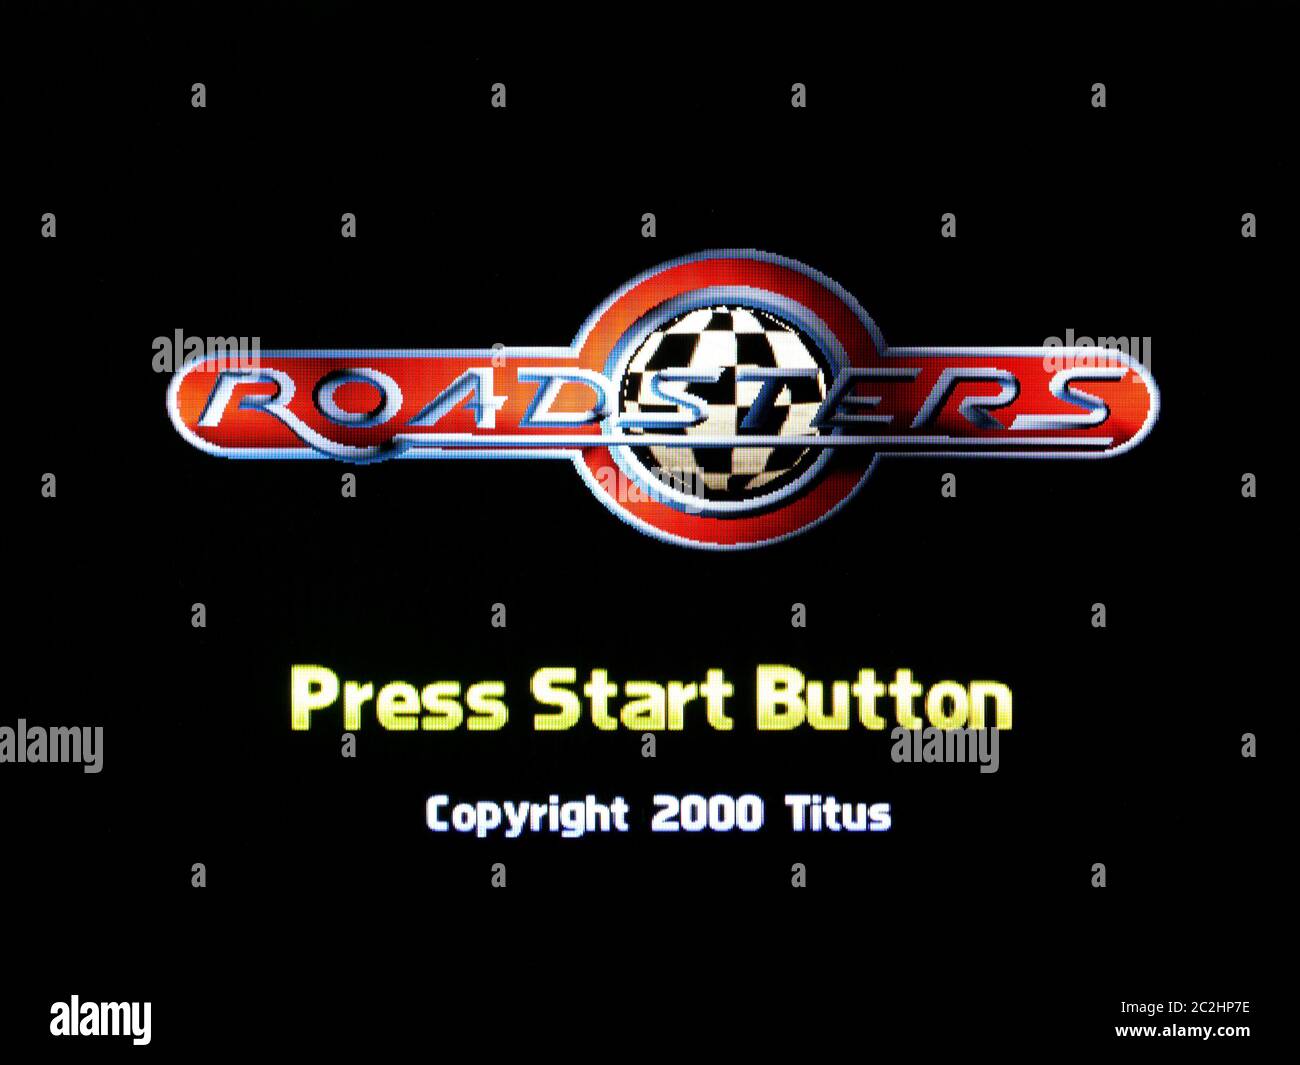 Roadsters - Sega Dreamcast Videogame - Editorial use only Stock Photo